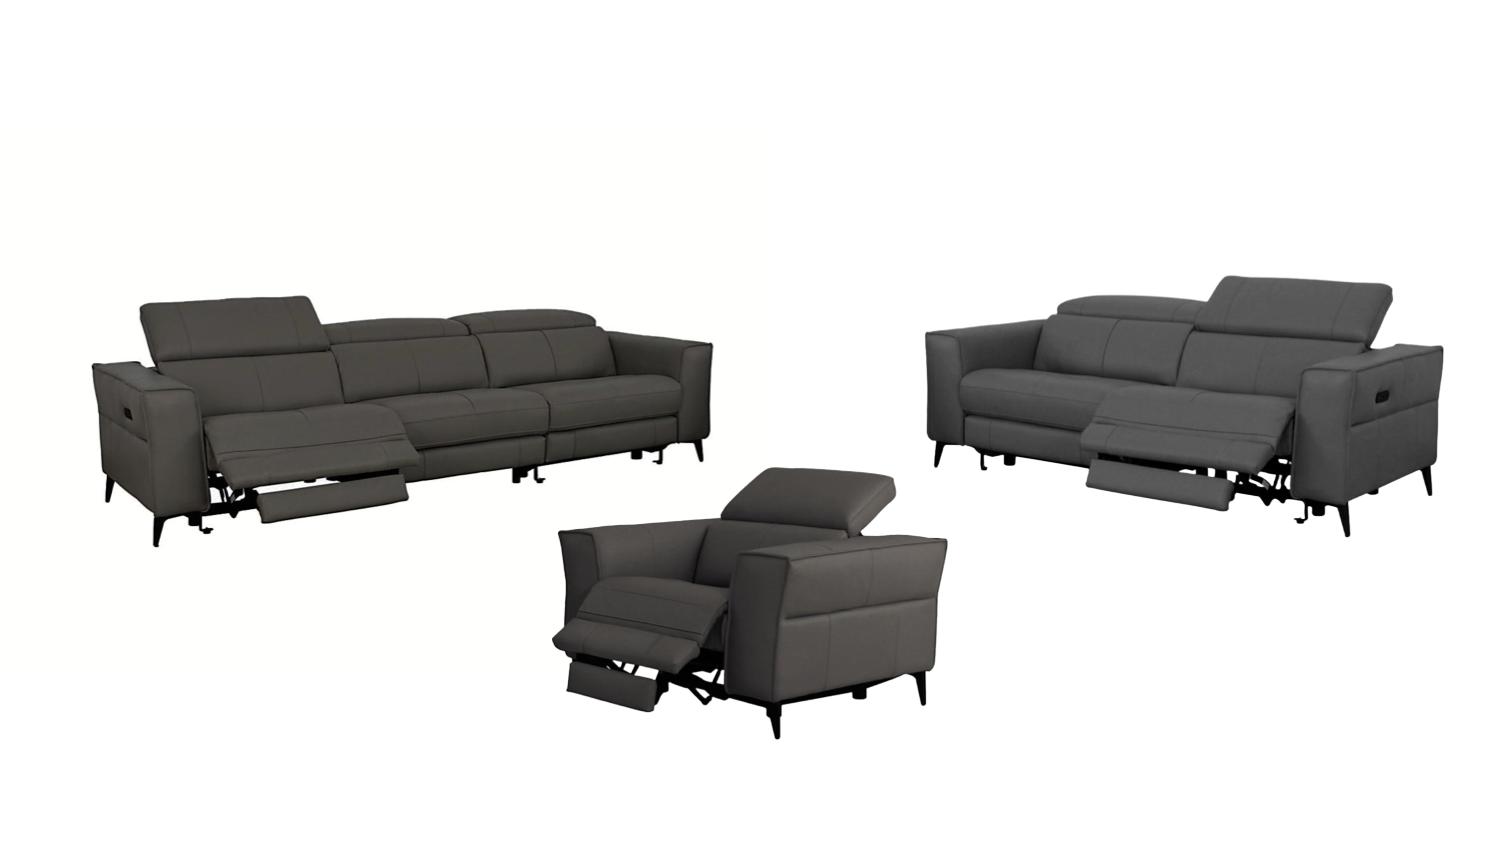 Modern Sofa Loveseat and Chair Set Nella VGKN-E9193-DKGRY-3pcs in Gray Leather